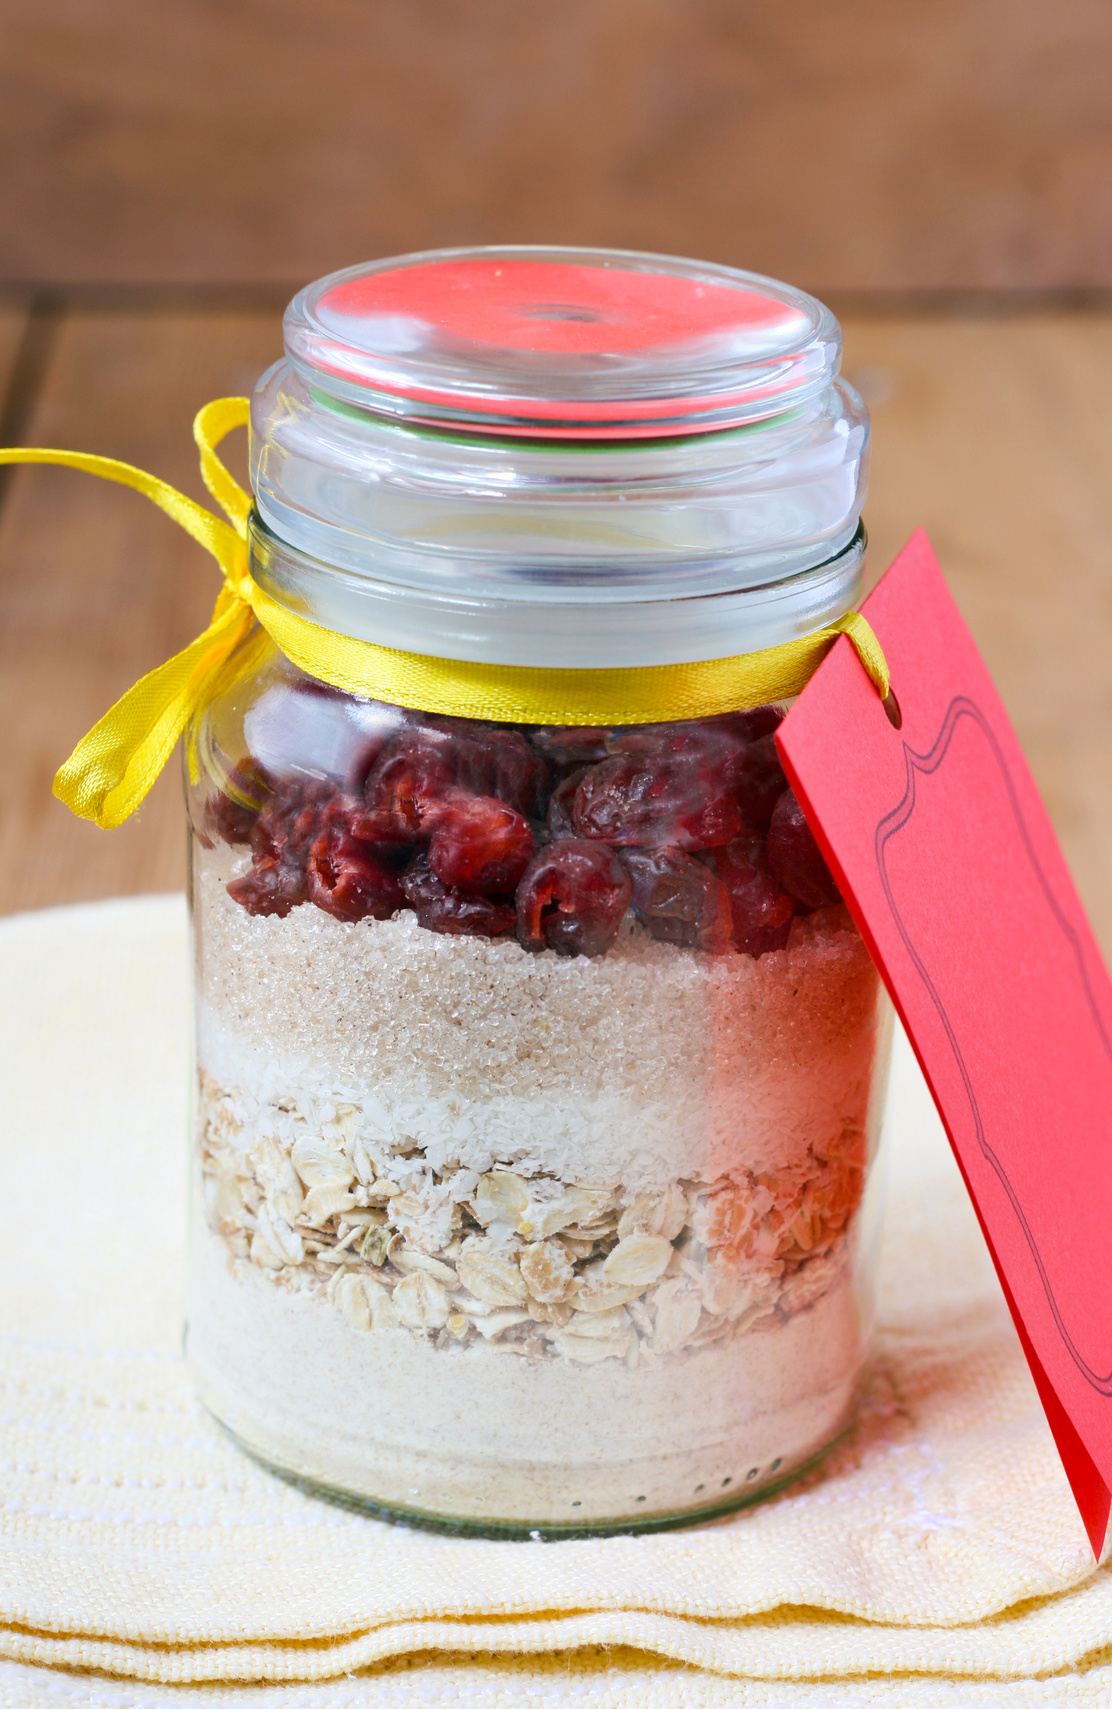 Cookie in a Jar Holiday Treat: Cranberry Hootycreeks